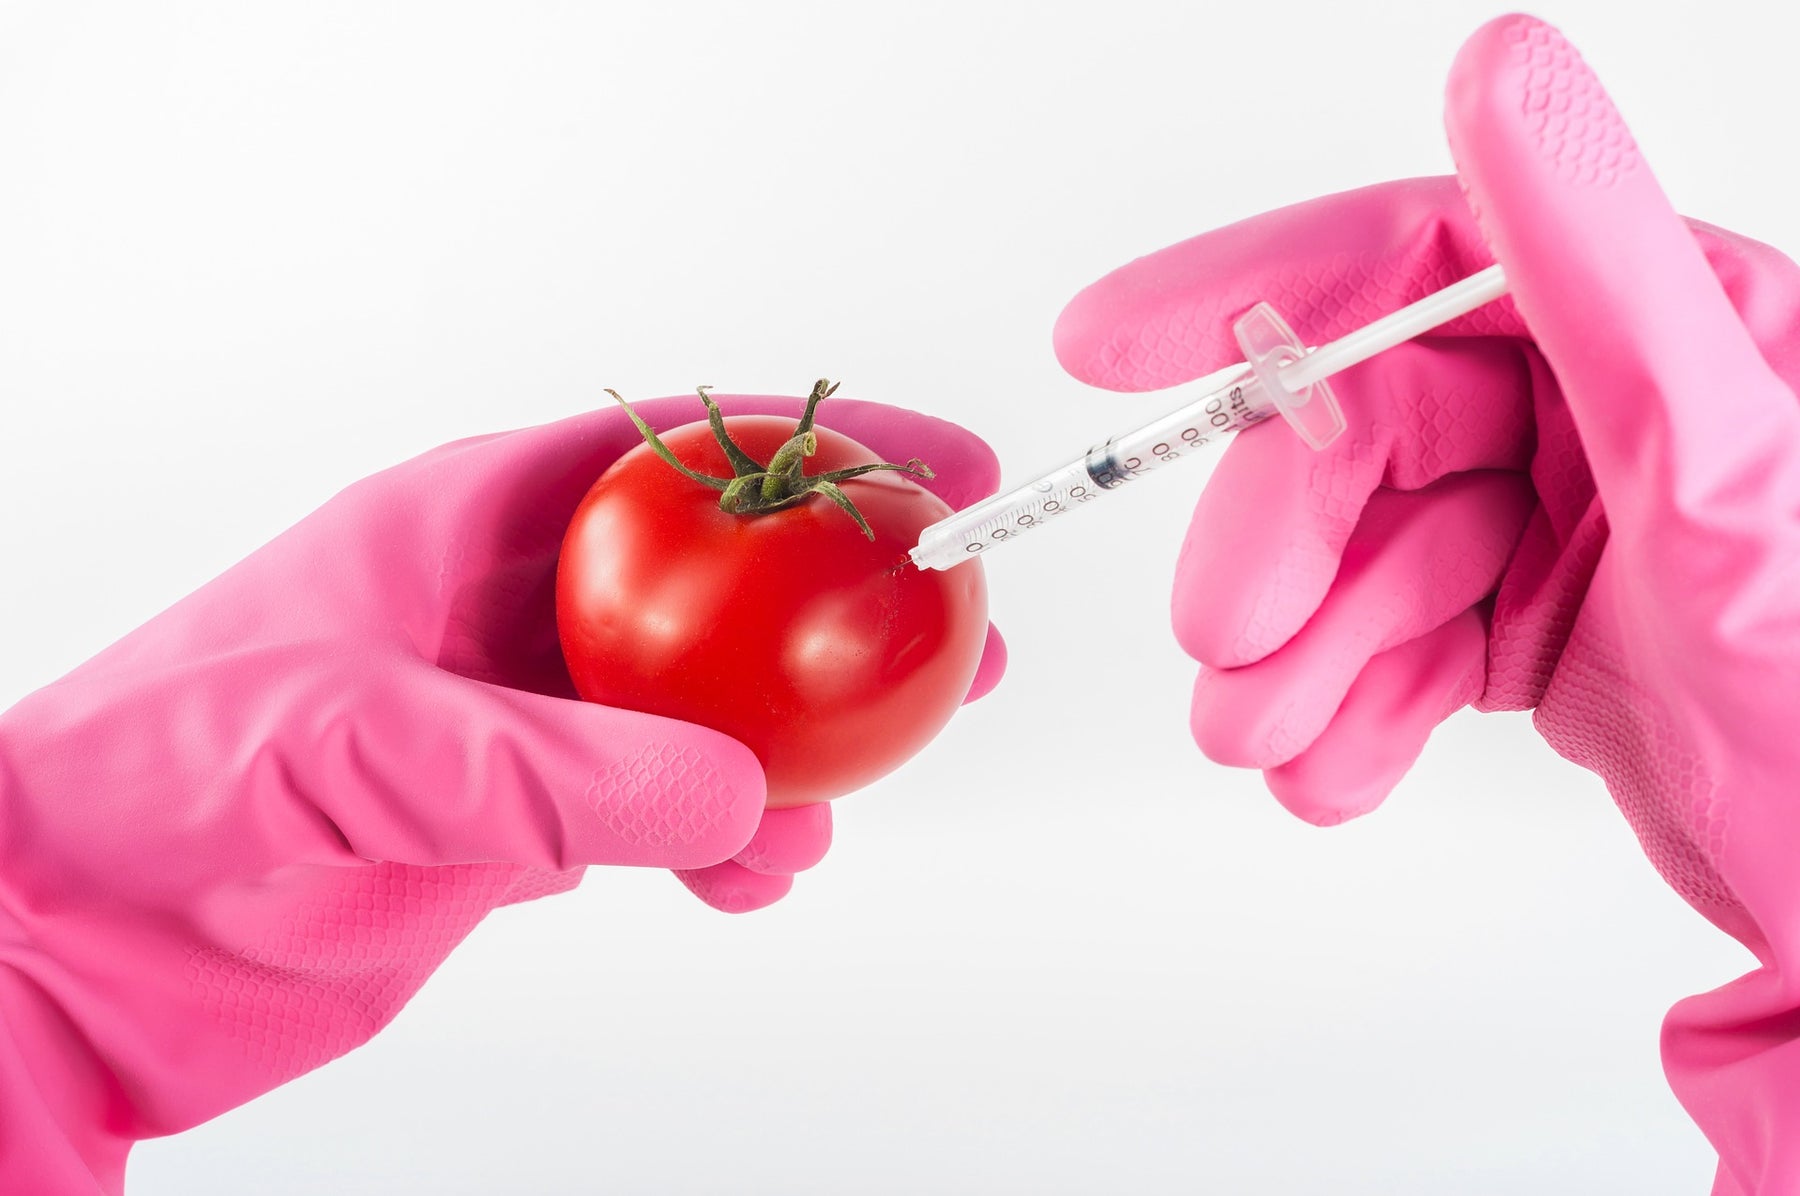 Person with pink gloves injecting liquid into a tomato